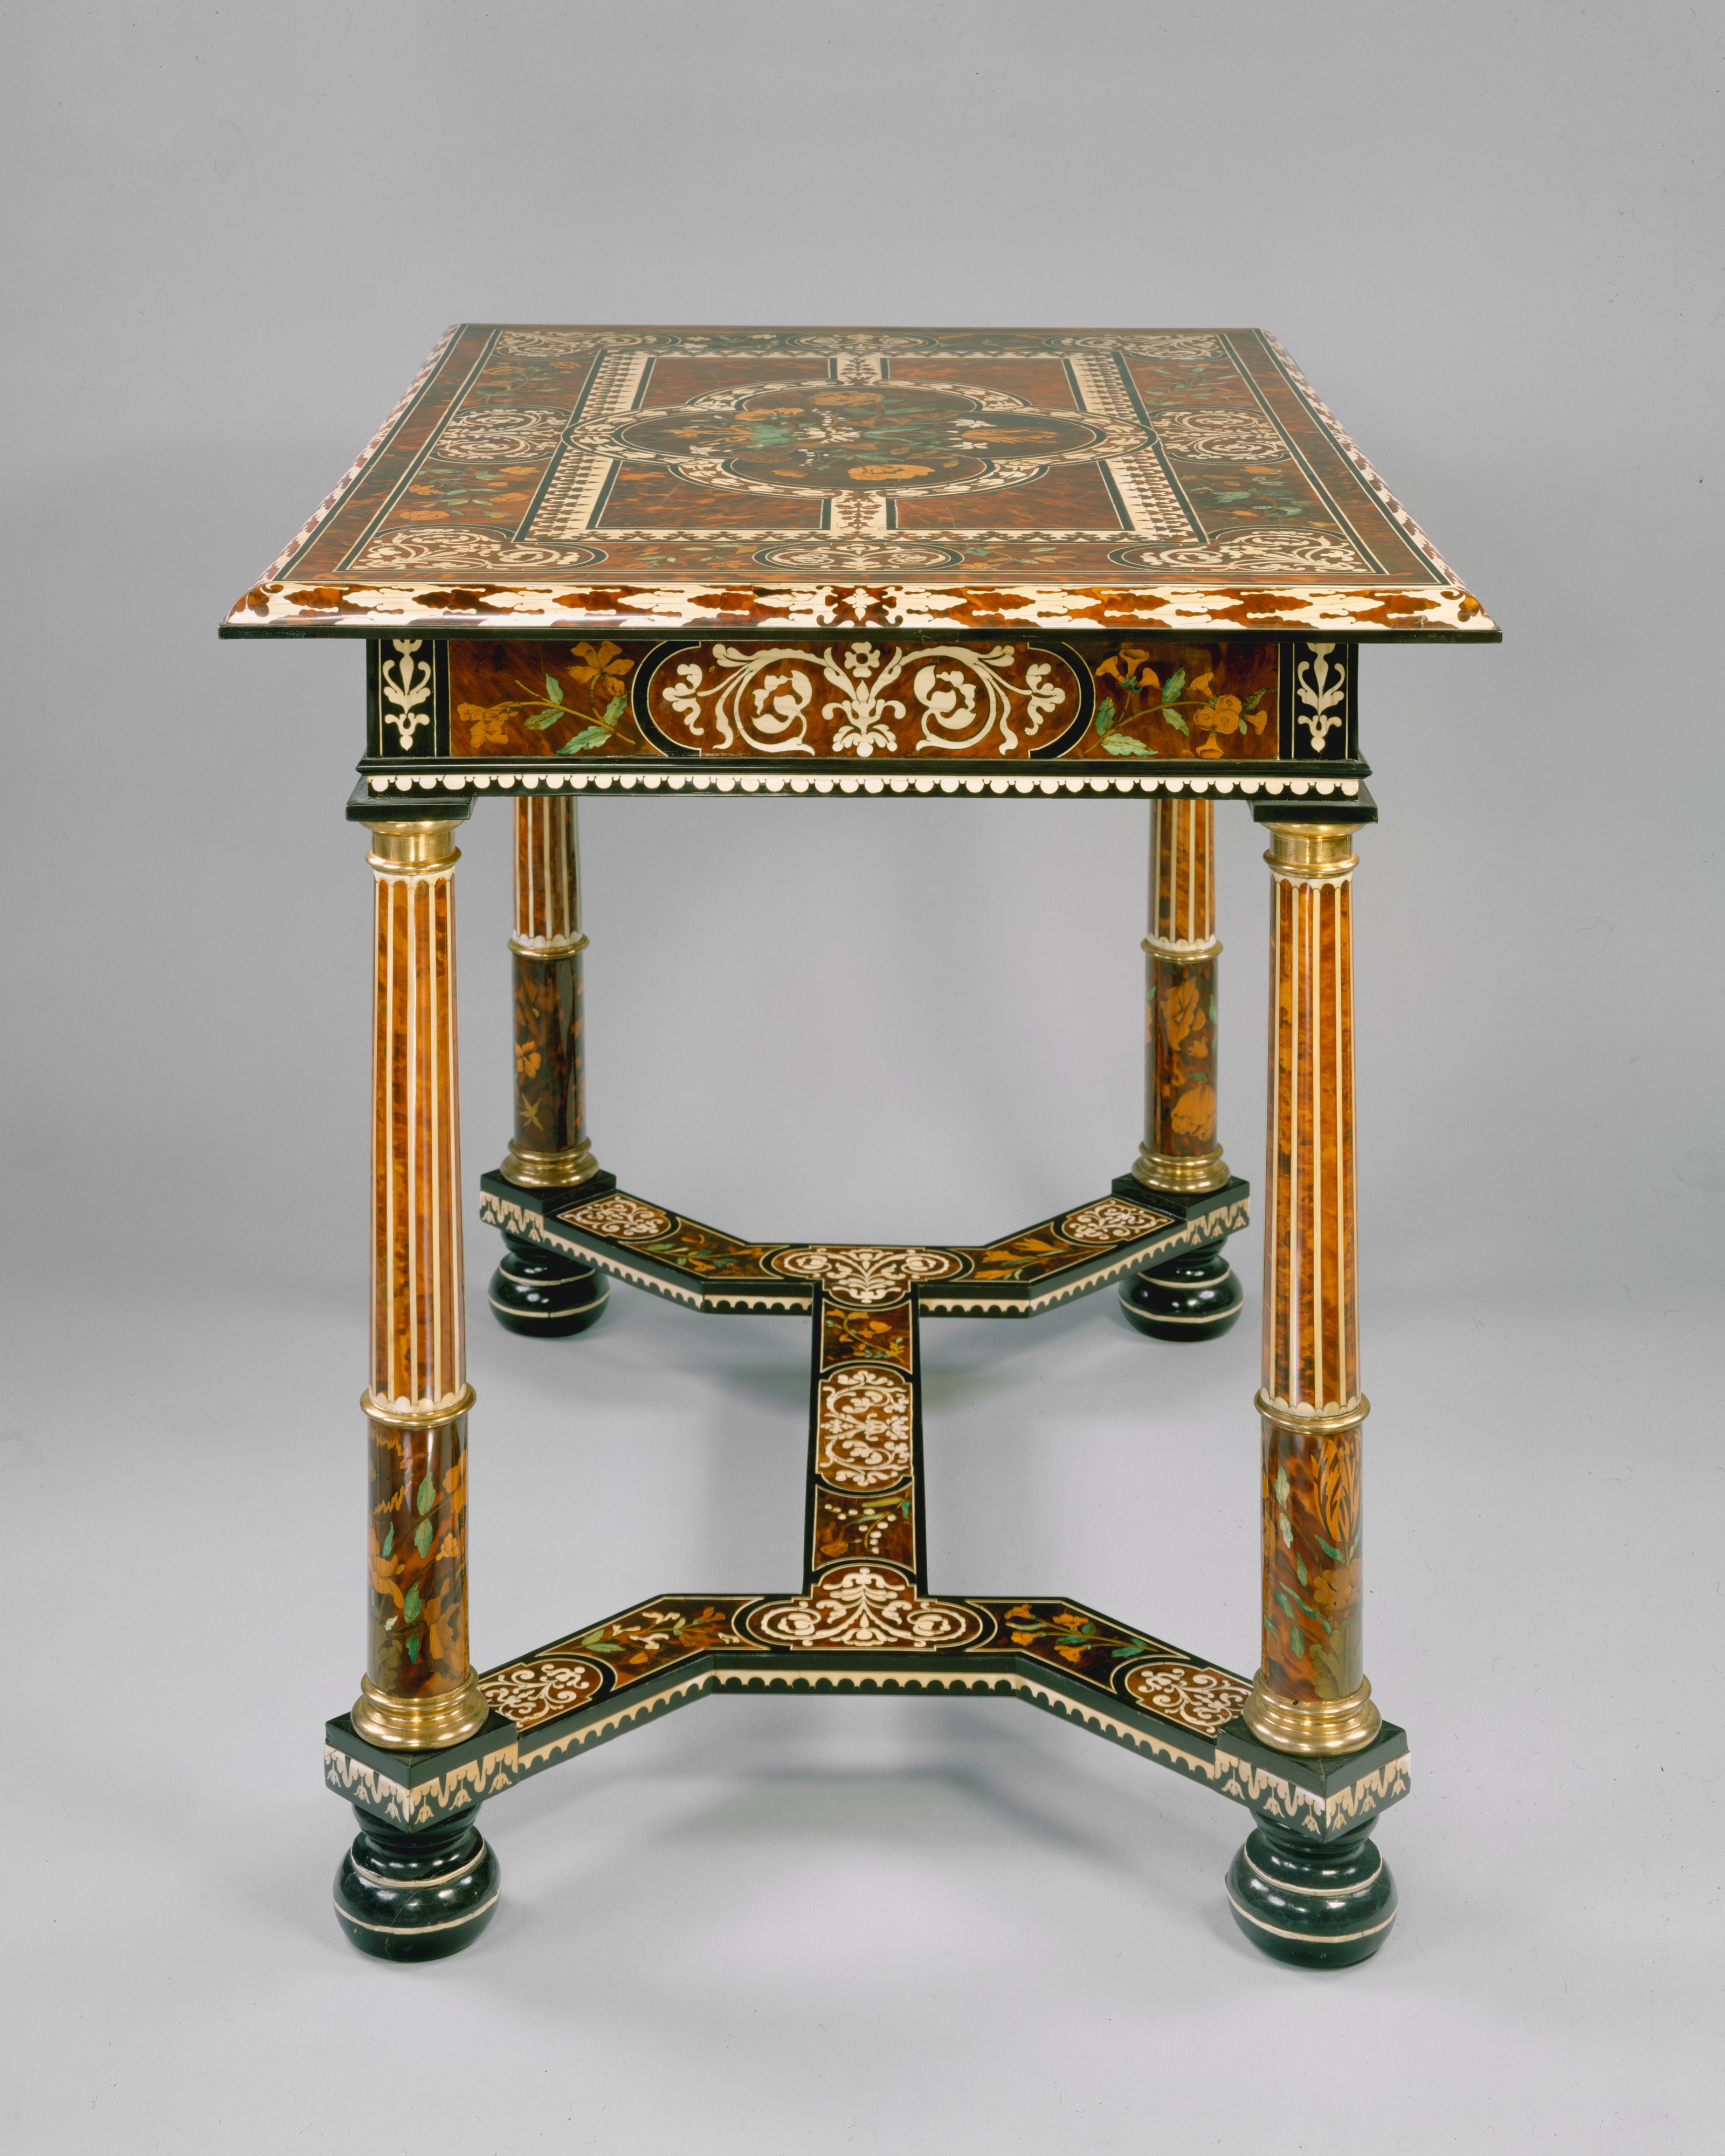 Pierre Attributed Paris to of Metropolitan Gole Table Art The French, | | Museum |